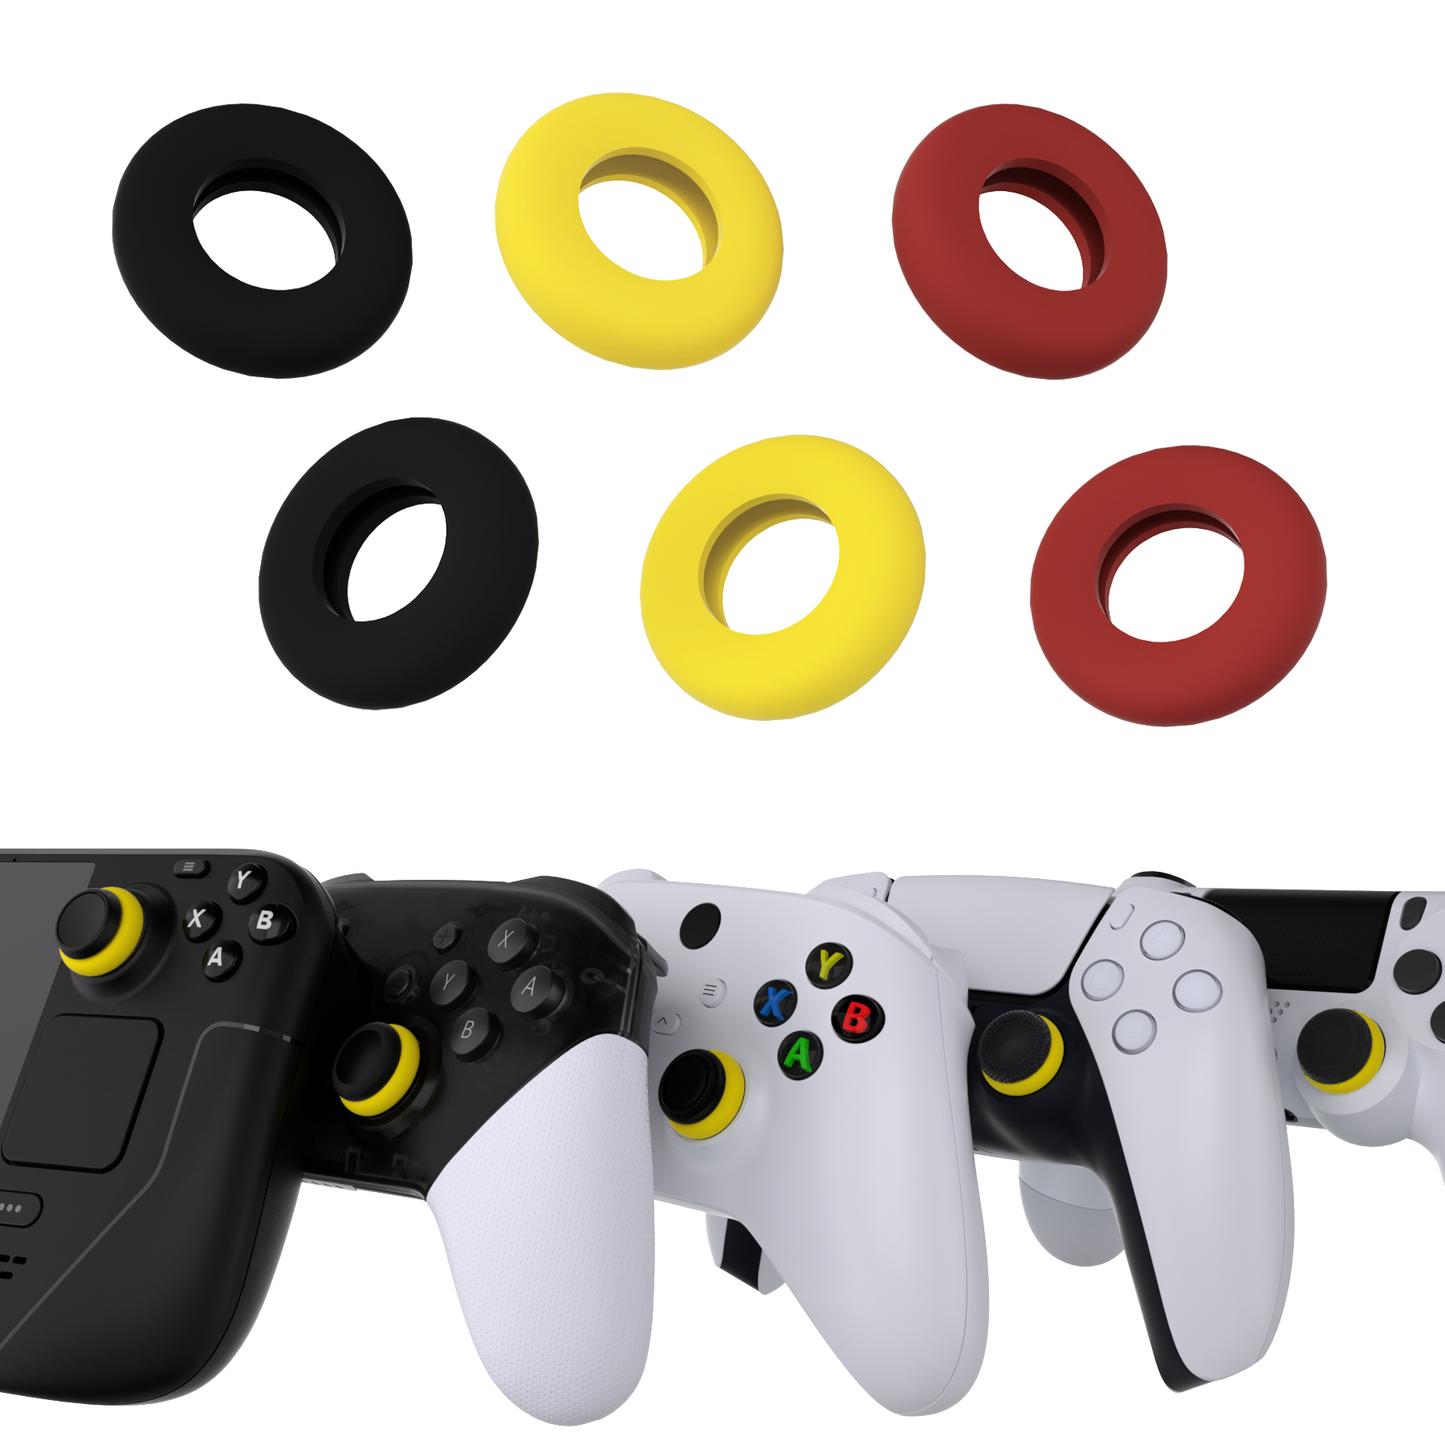 PlayVital 3 Pairs Silicone BuffeRings Aim Assist Target Motion Control Precision Rings for PS5, for PS4, for Xbox Series X/S, Xbox One, Xbox 360, for Switch Pro, for Steam Deck - 3 Different Strengths - PFPJ109 PlayVital